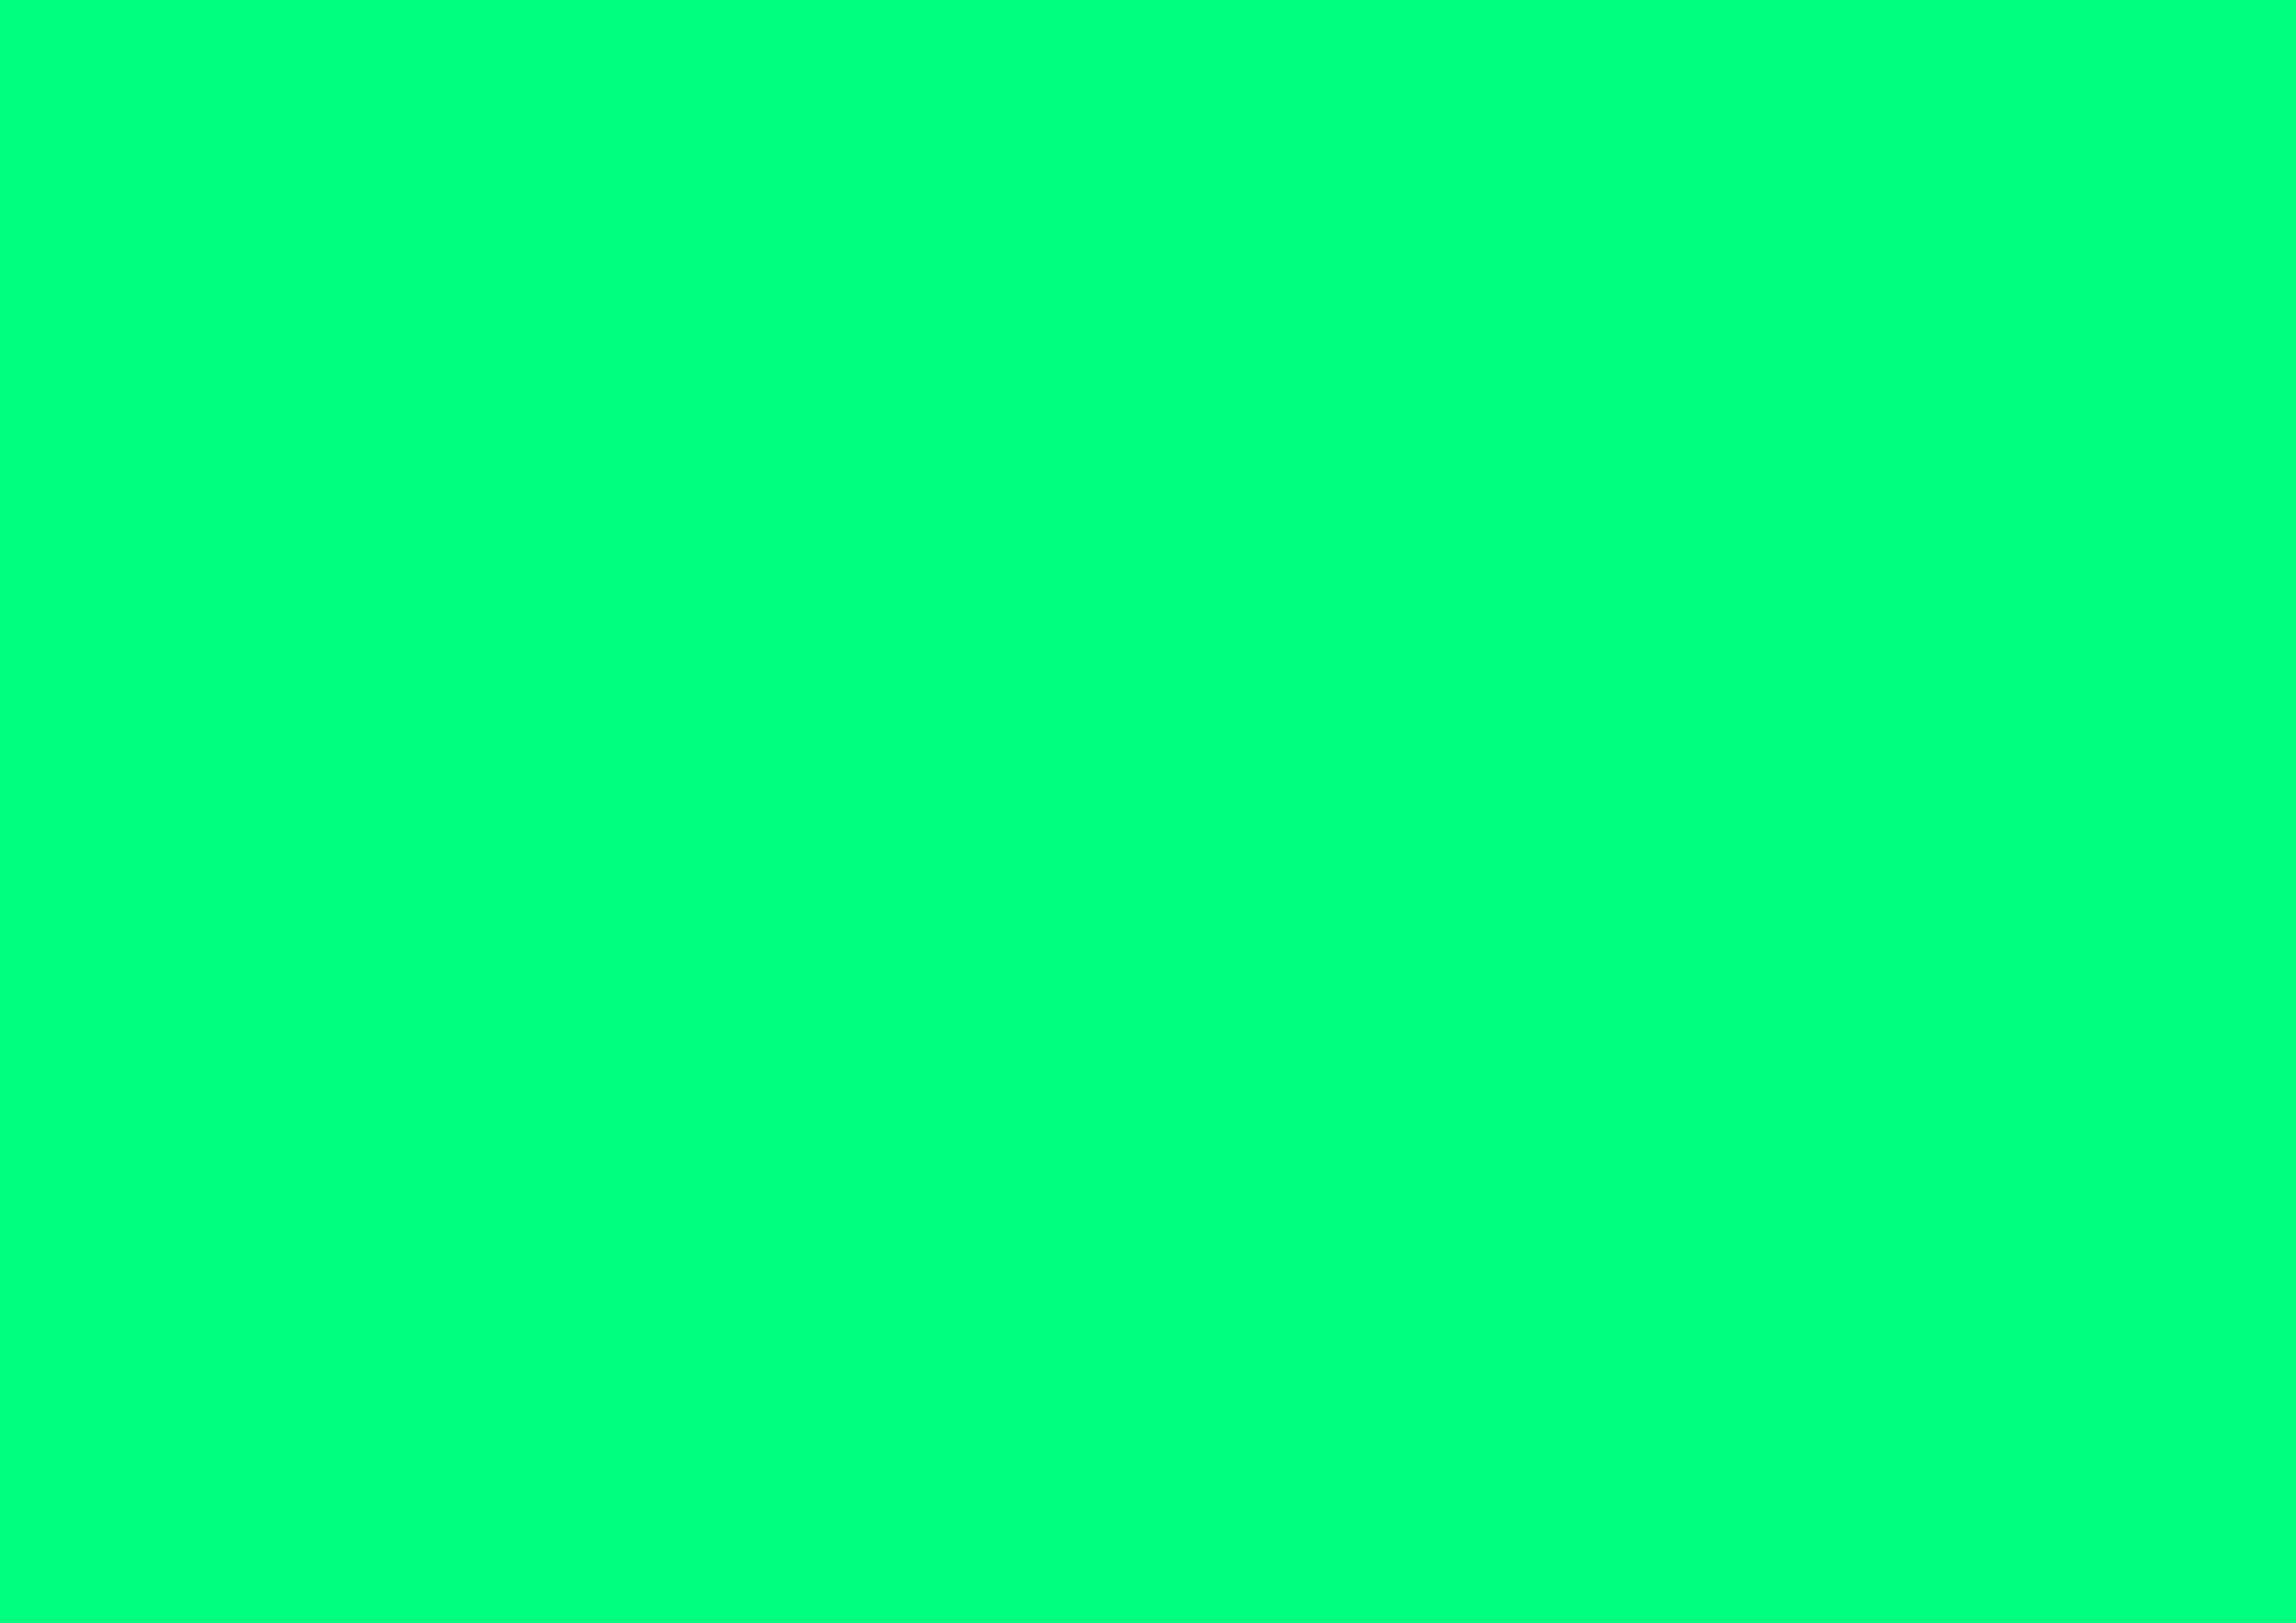 3508x2480 Spring Green Solid Color Background